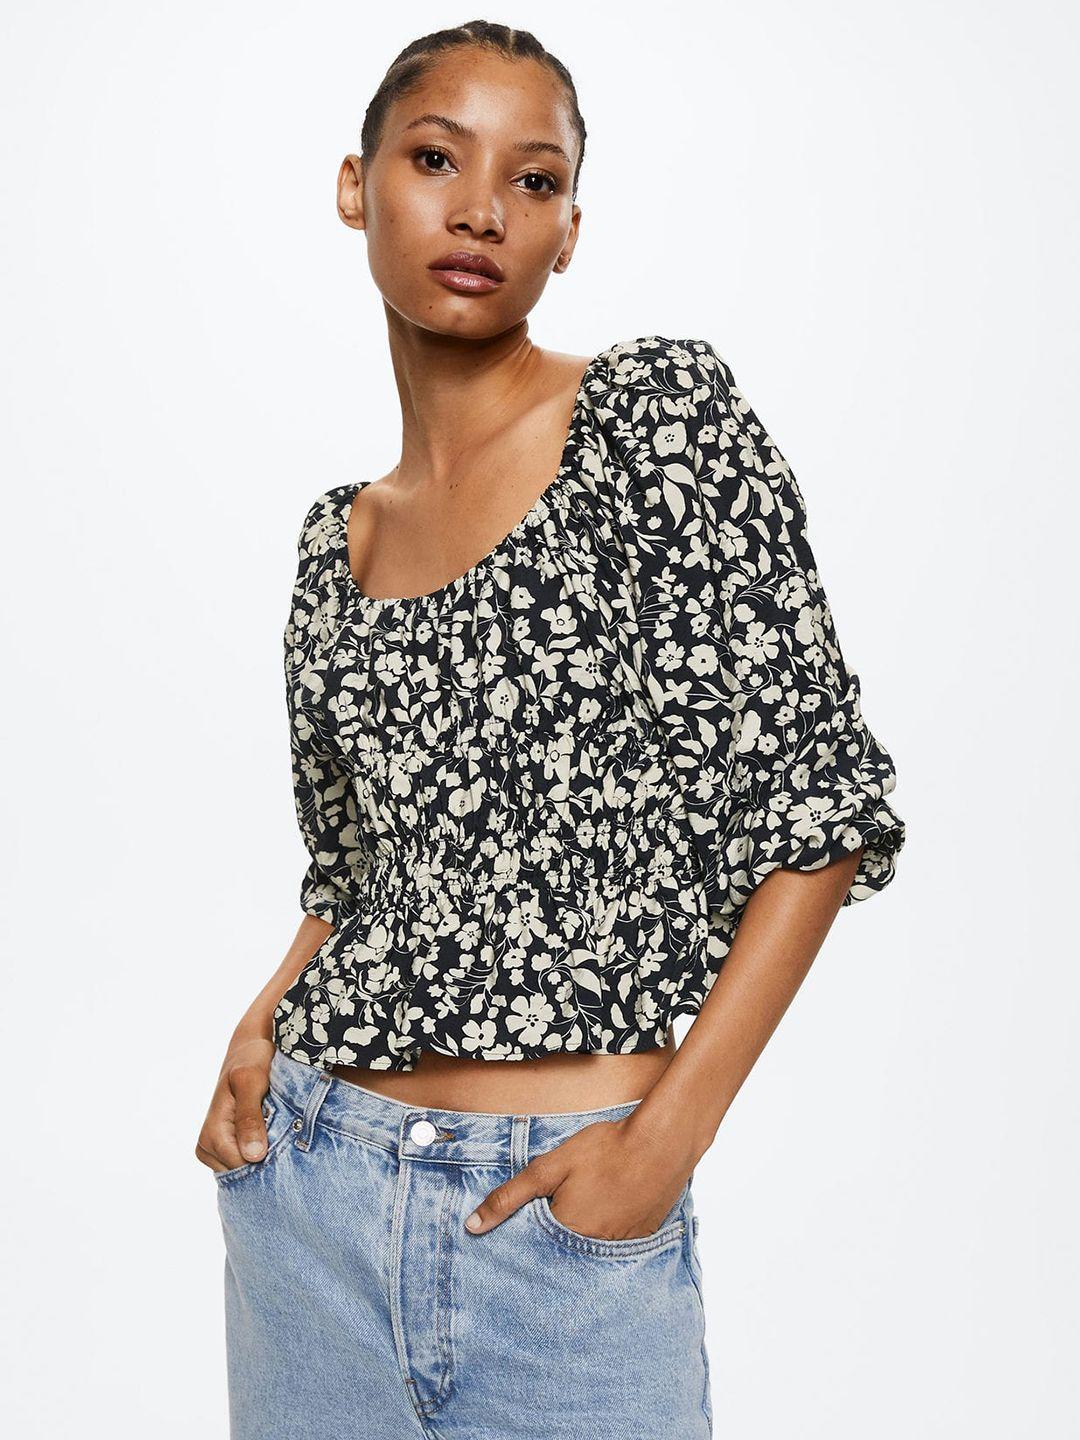 mango navy blue & off white floral print cinched waist crop sustainable top